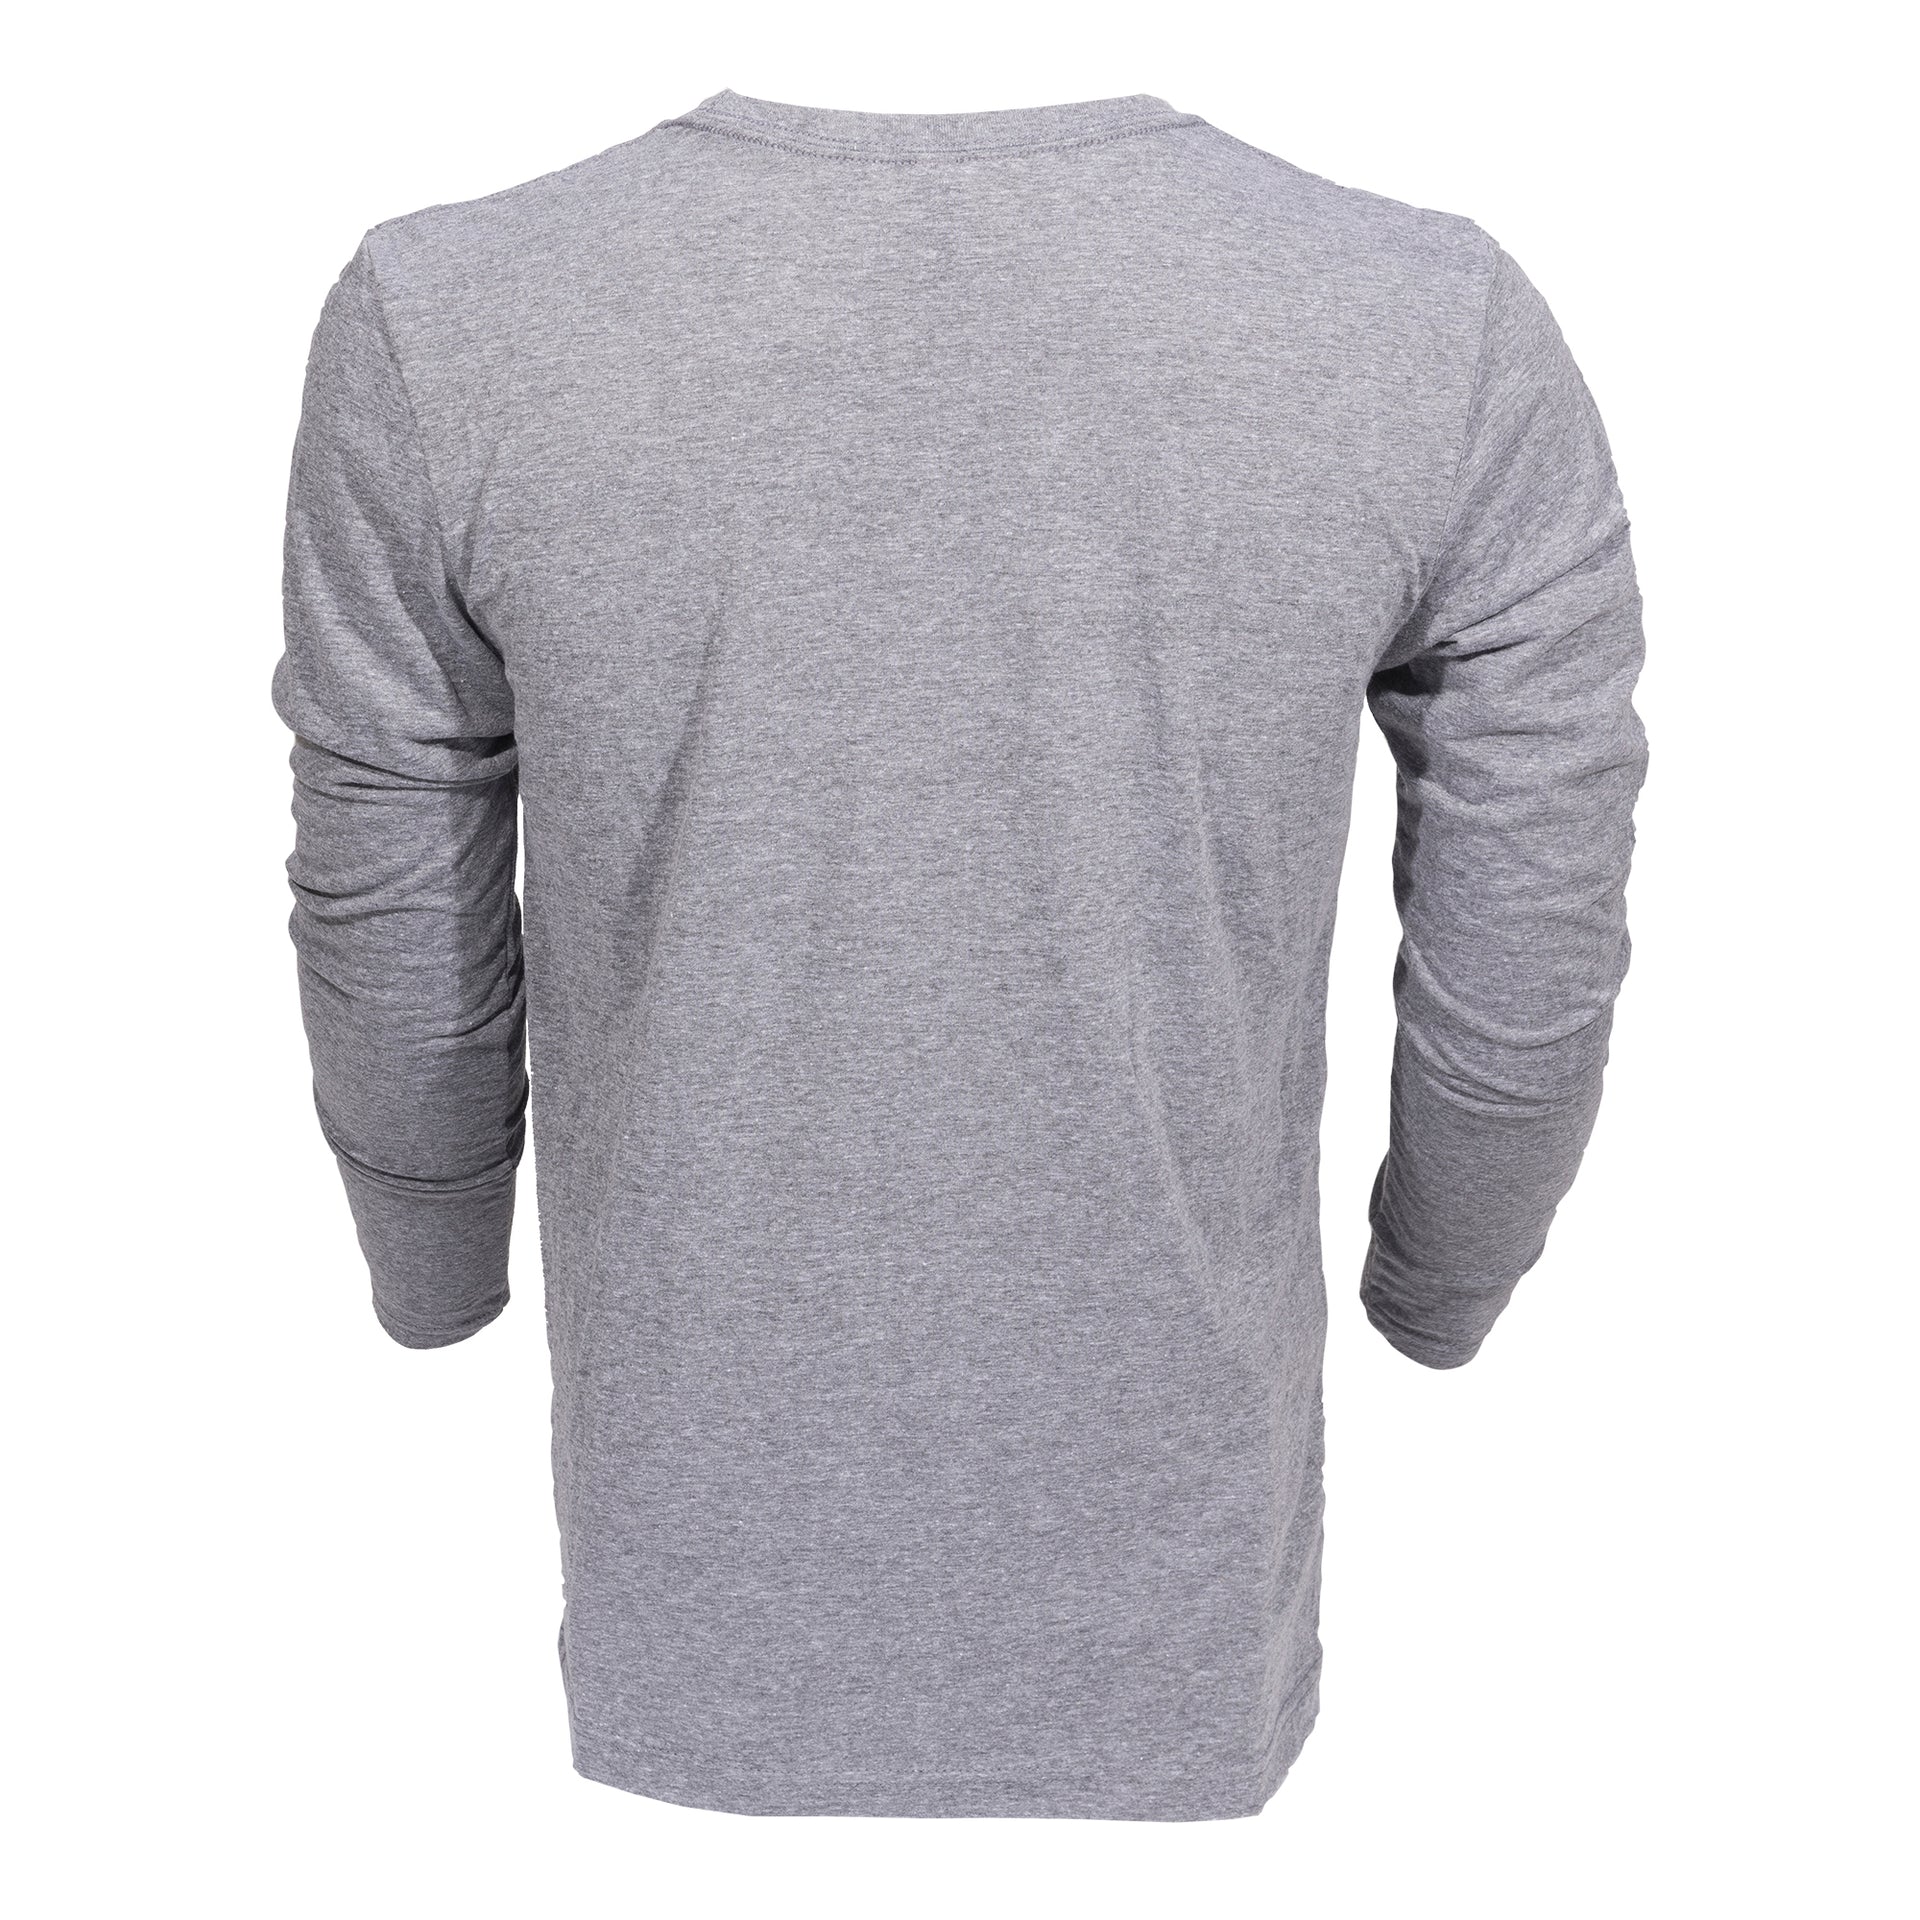 JUNK Heather Gray Long Sleeve - View 2